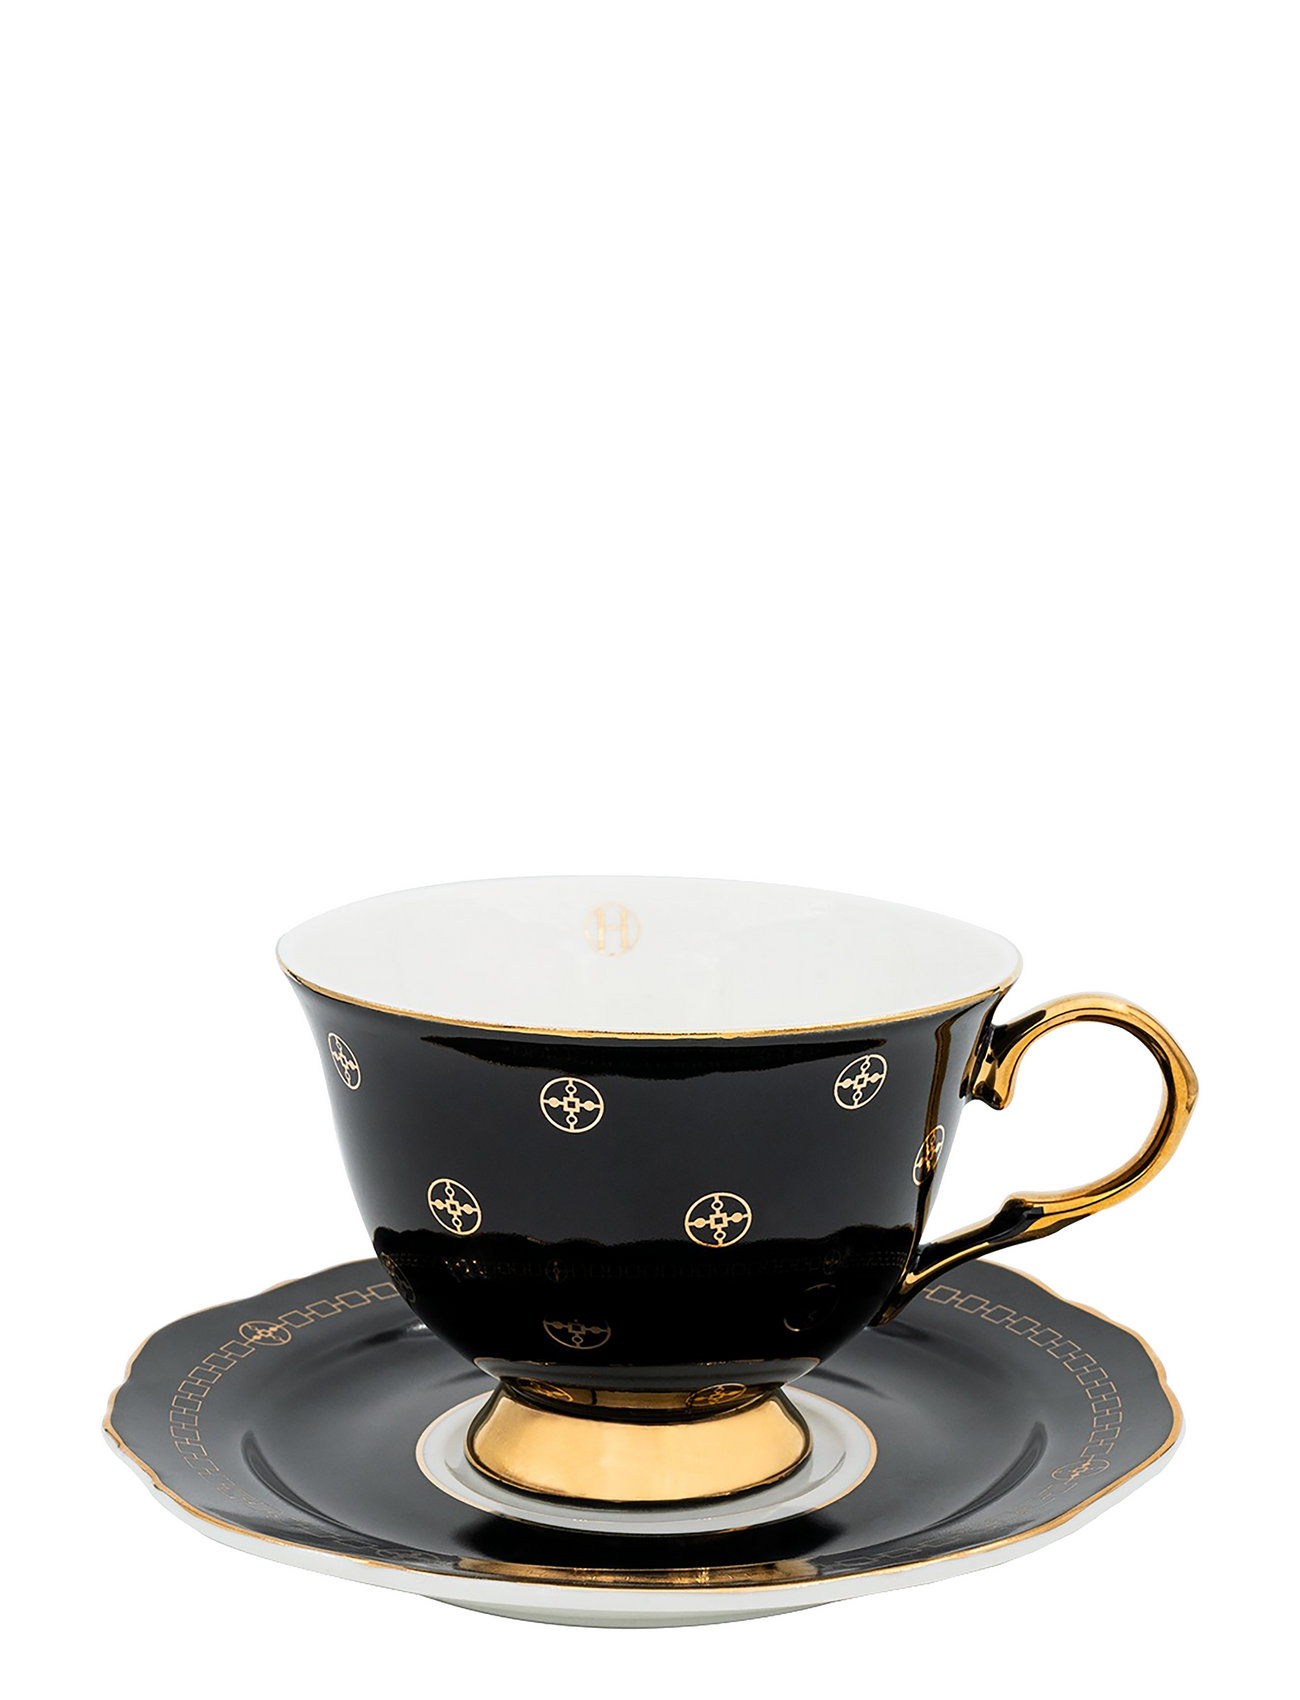 Cup With Saucer - Anima Gemella Nero Home Tableware Cups & Mugs Tea Cups Black Hilke Collection